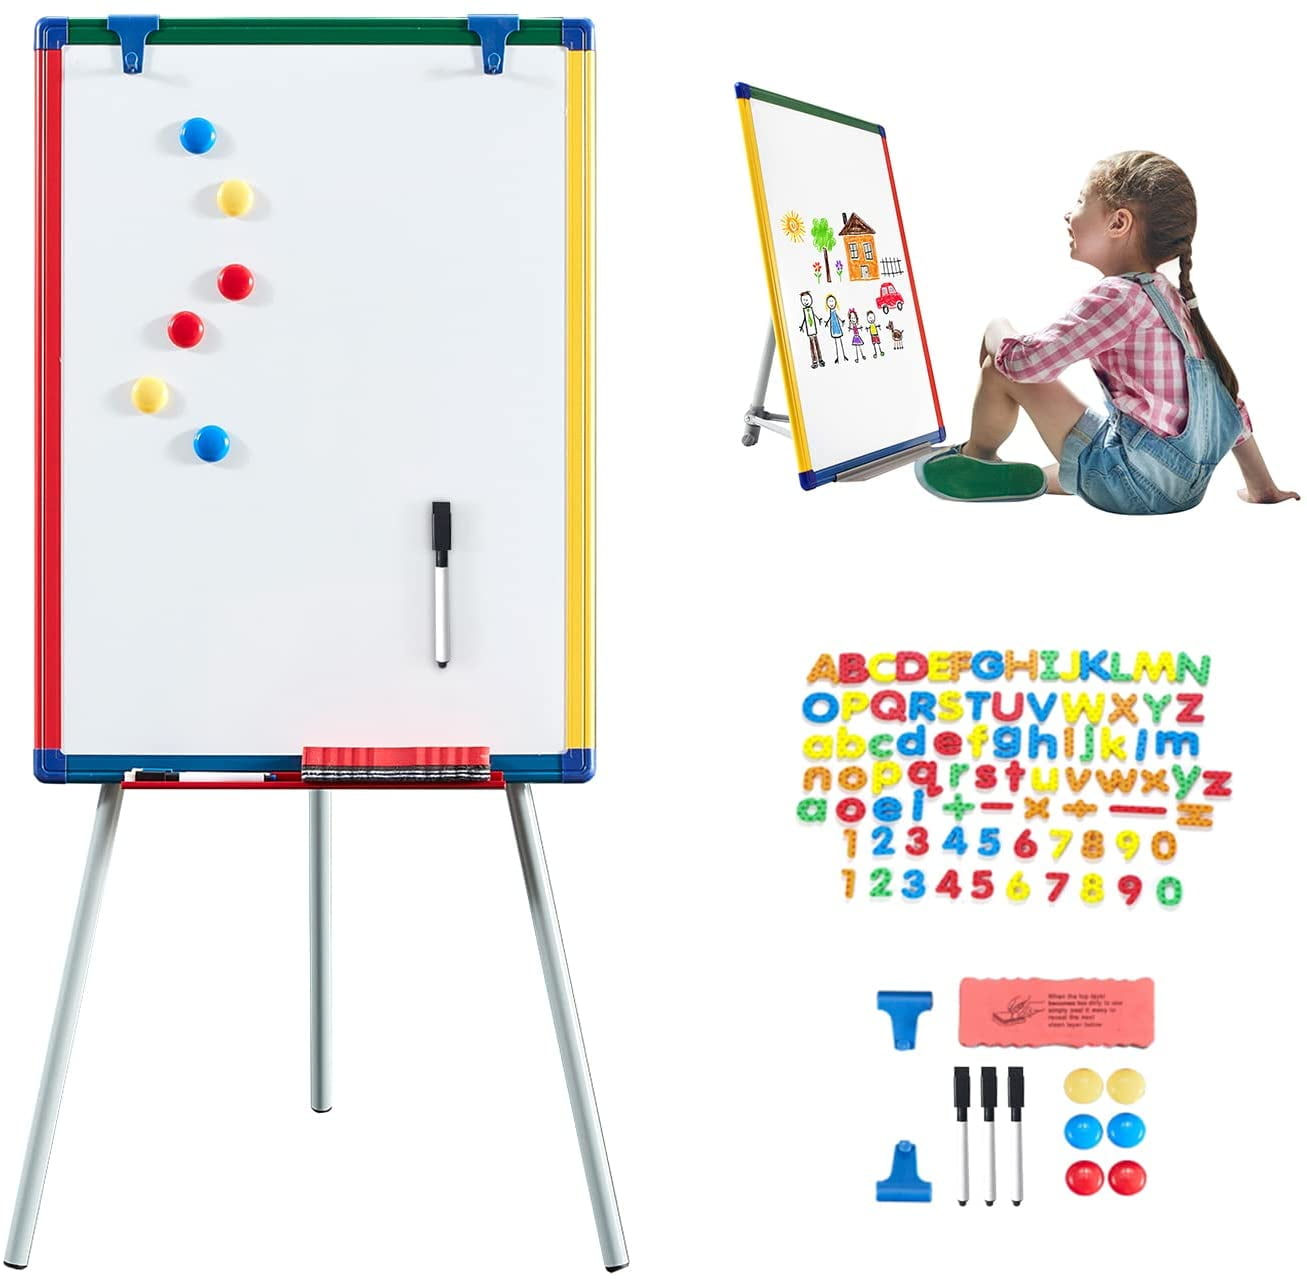 IbexStationers Magnetic Kids Dry Erase Board Whiteboard Easel for Children Home Learning Tools Double Sided Marker Board with Four Color Markers and Eraser Size 12x16 